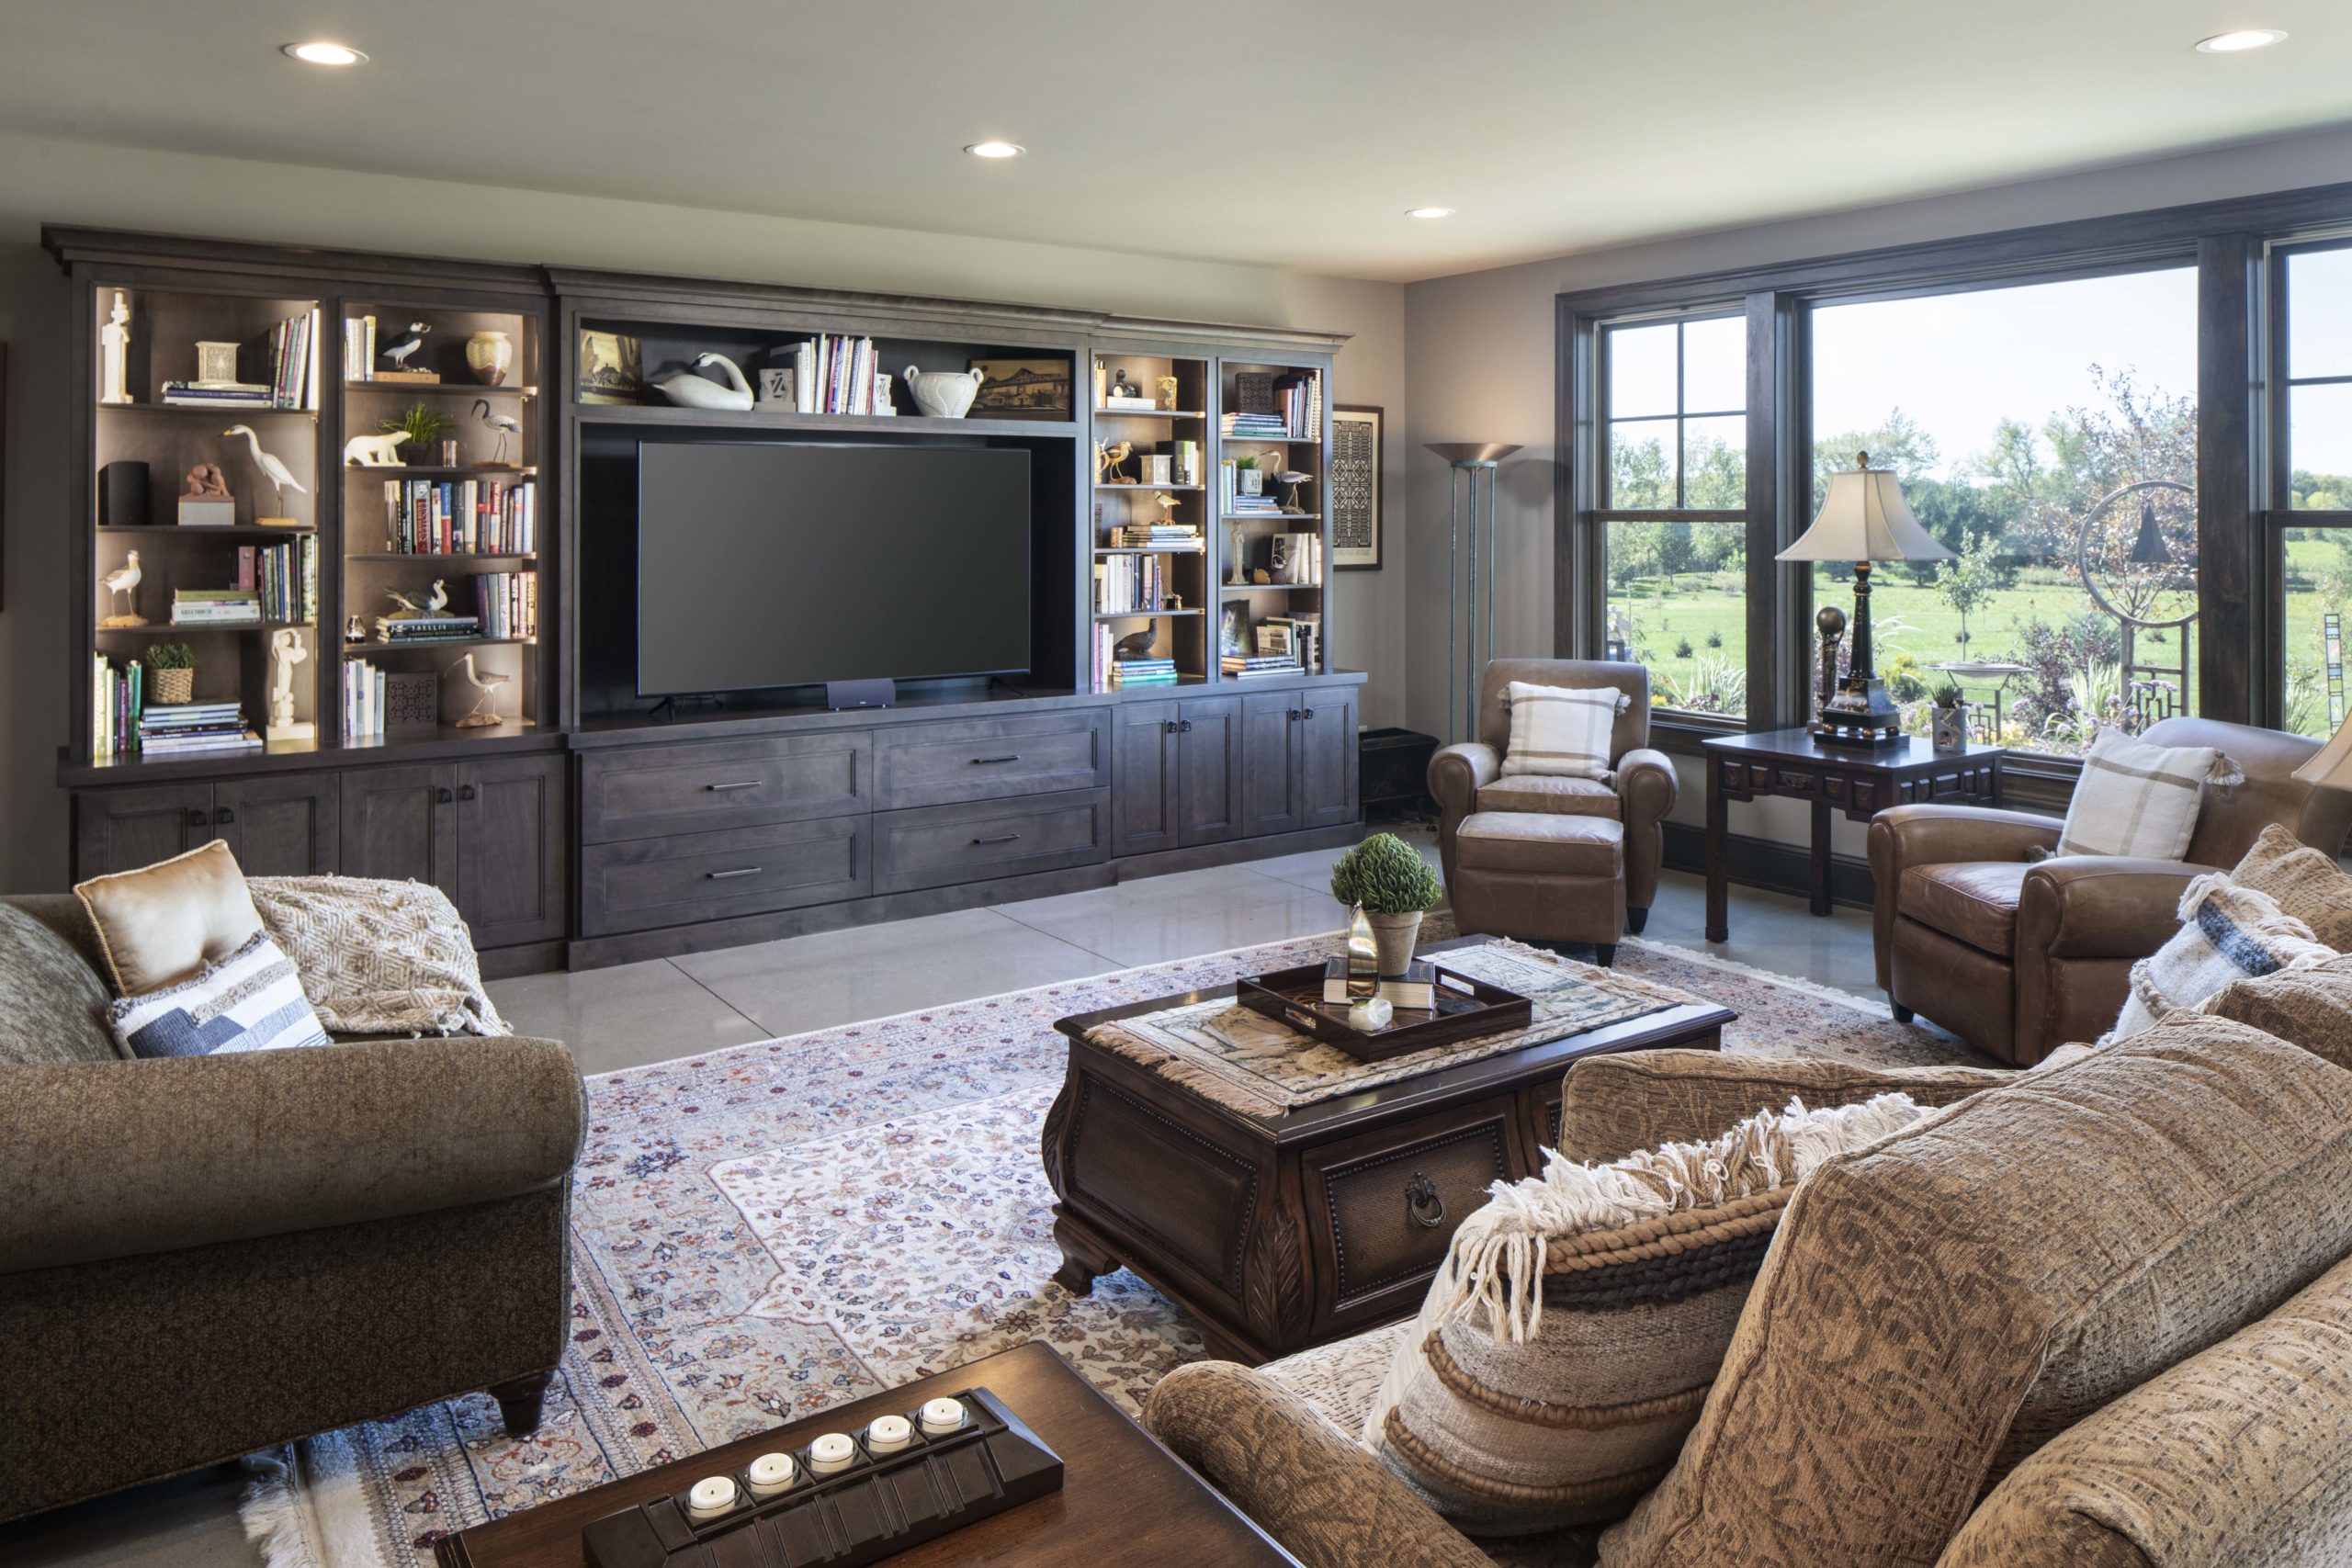 A prairie-style living room featuring comfortable couches and a sleek TV.